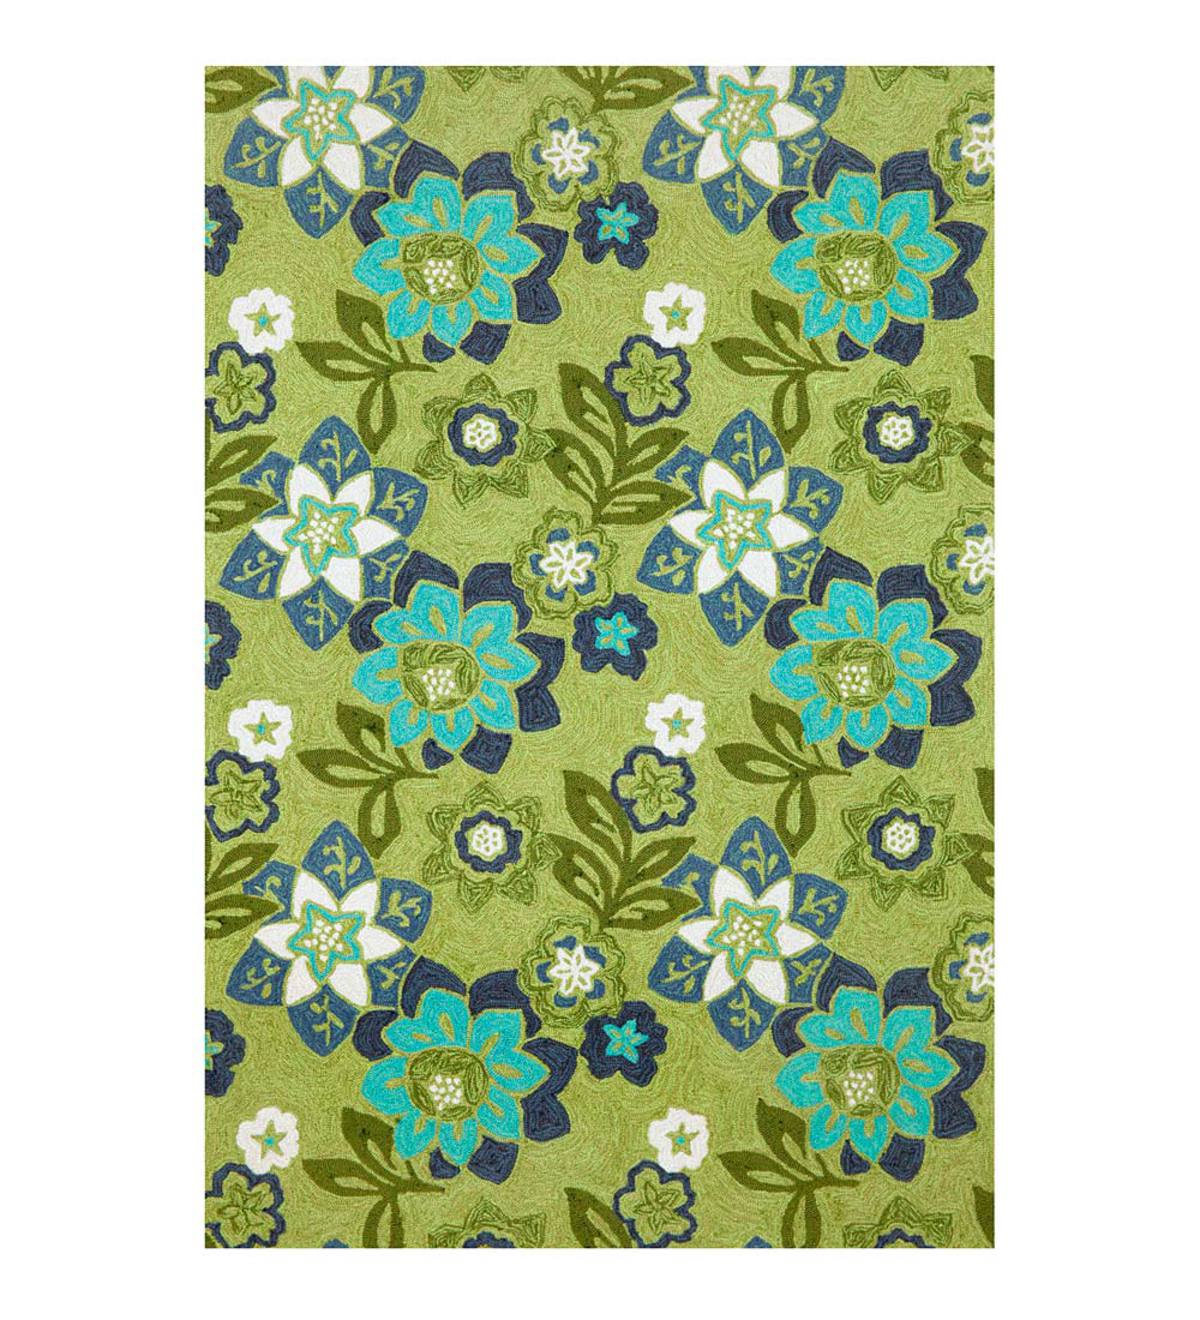 Blue and Green Floral Accent Rug, 5'W x 7'6"L